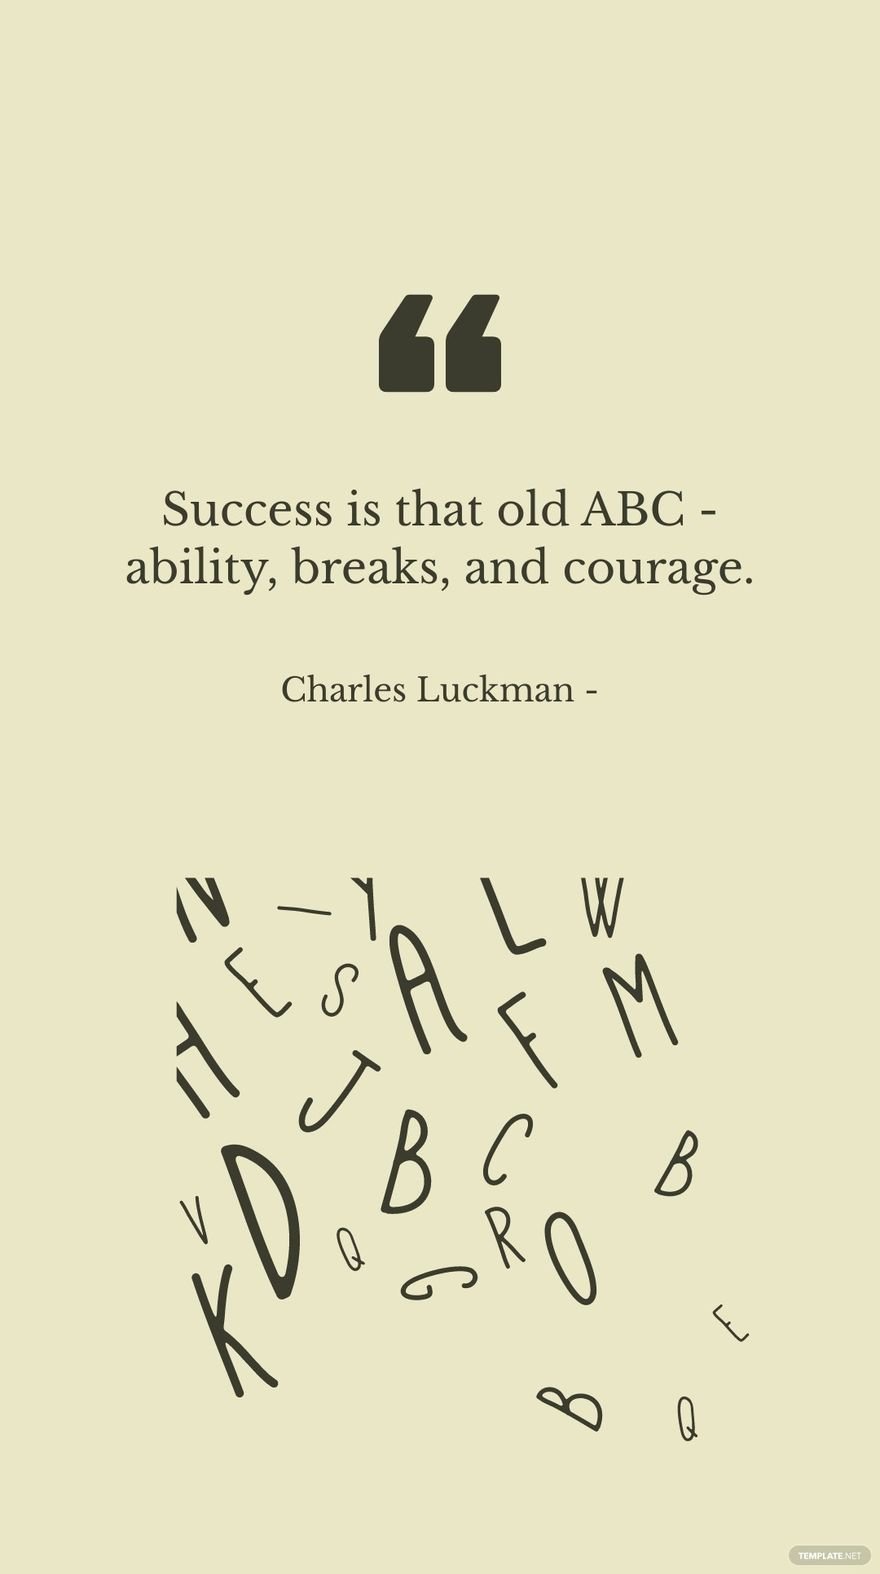 Free Charles Luckman - Success is that old ABC - ability, breaks, and courage.